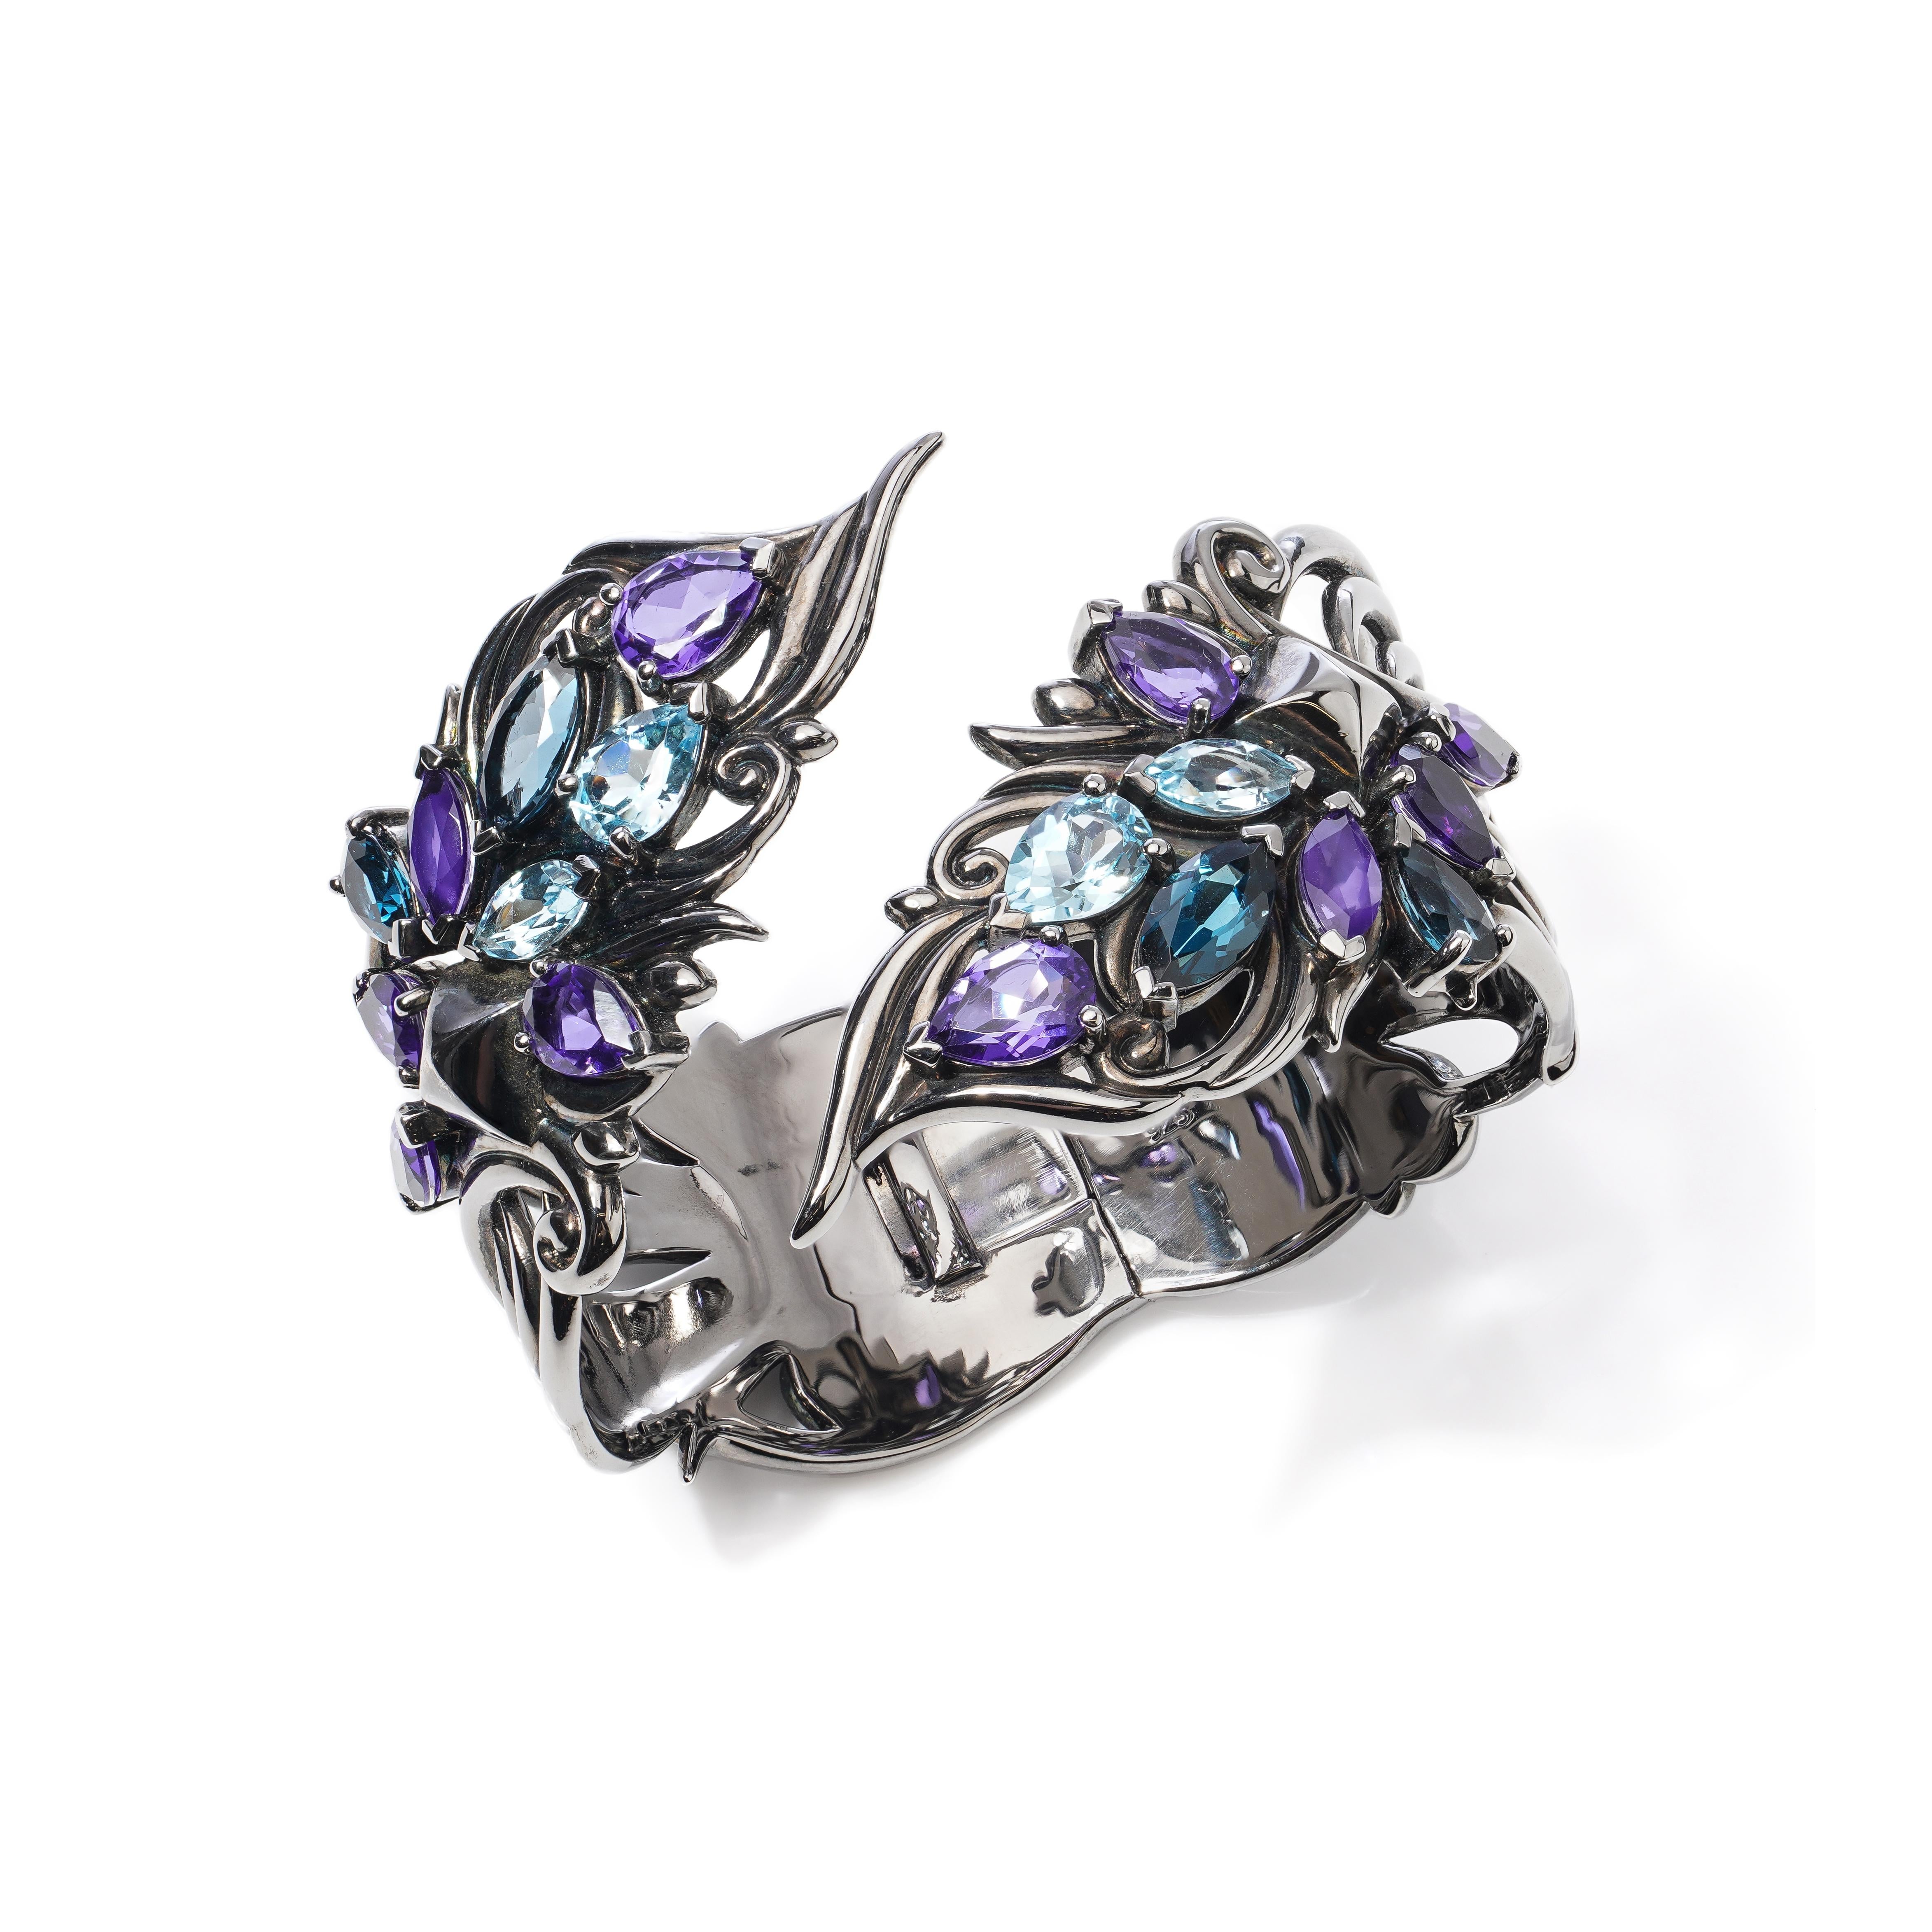 Stephen Webster Rhodium - plated  925 sterling silver cuff bangle set with Topazes and Amethyst stones.  
Maker: Stephen Webster
Made in England, 
Hallmarked 925

Dimensions -
Inner diameter  x width: 6.1 x 4.7 cm 
Weight: 109 grams 

Blue Quartz -